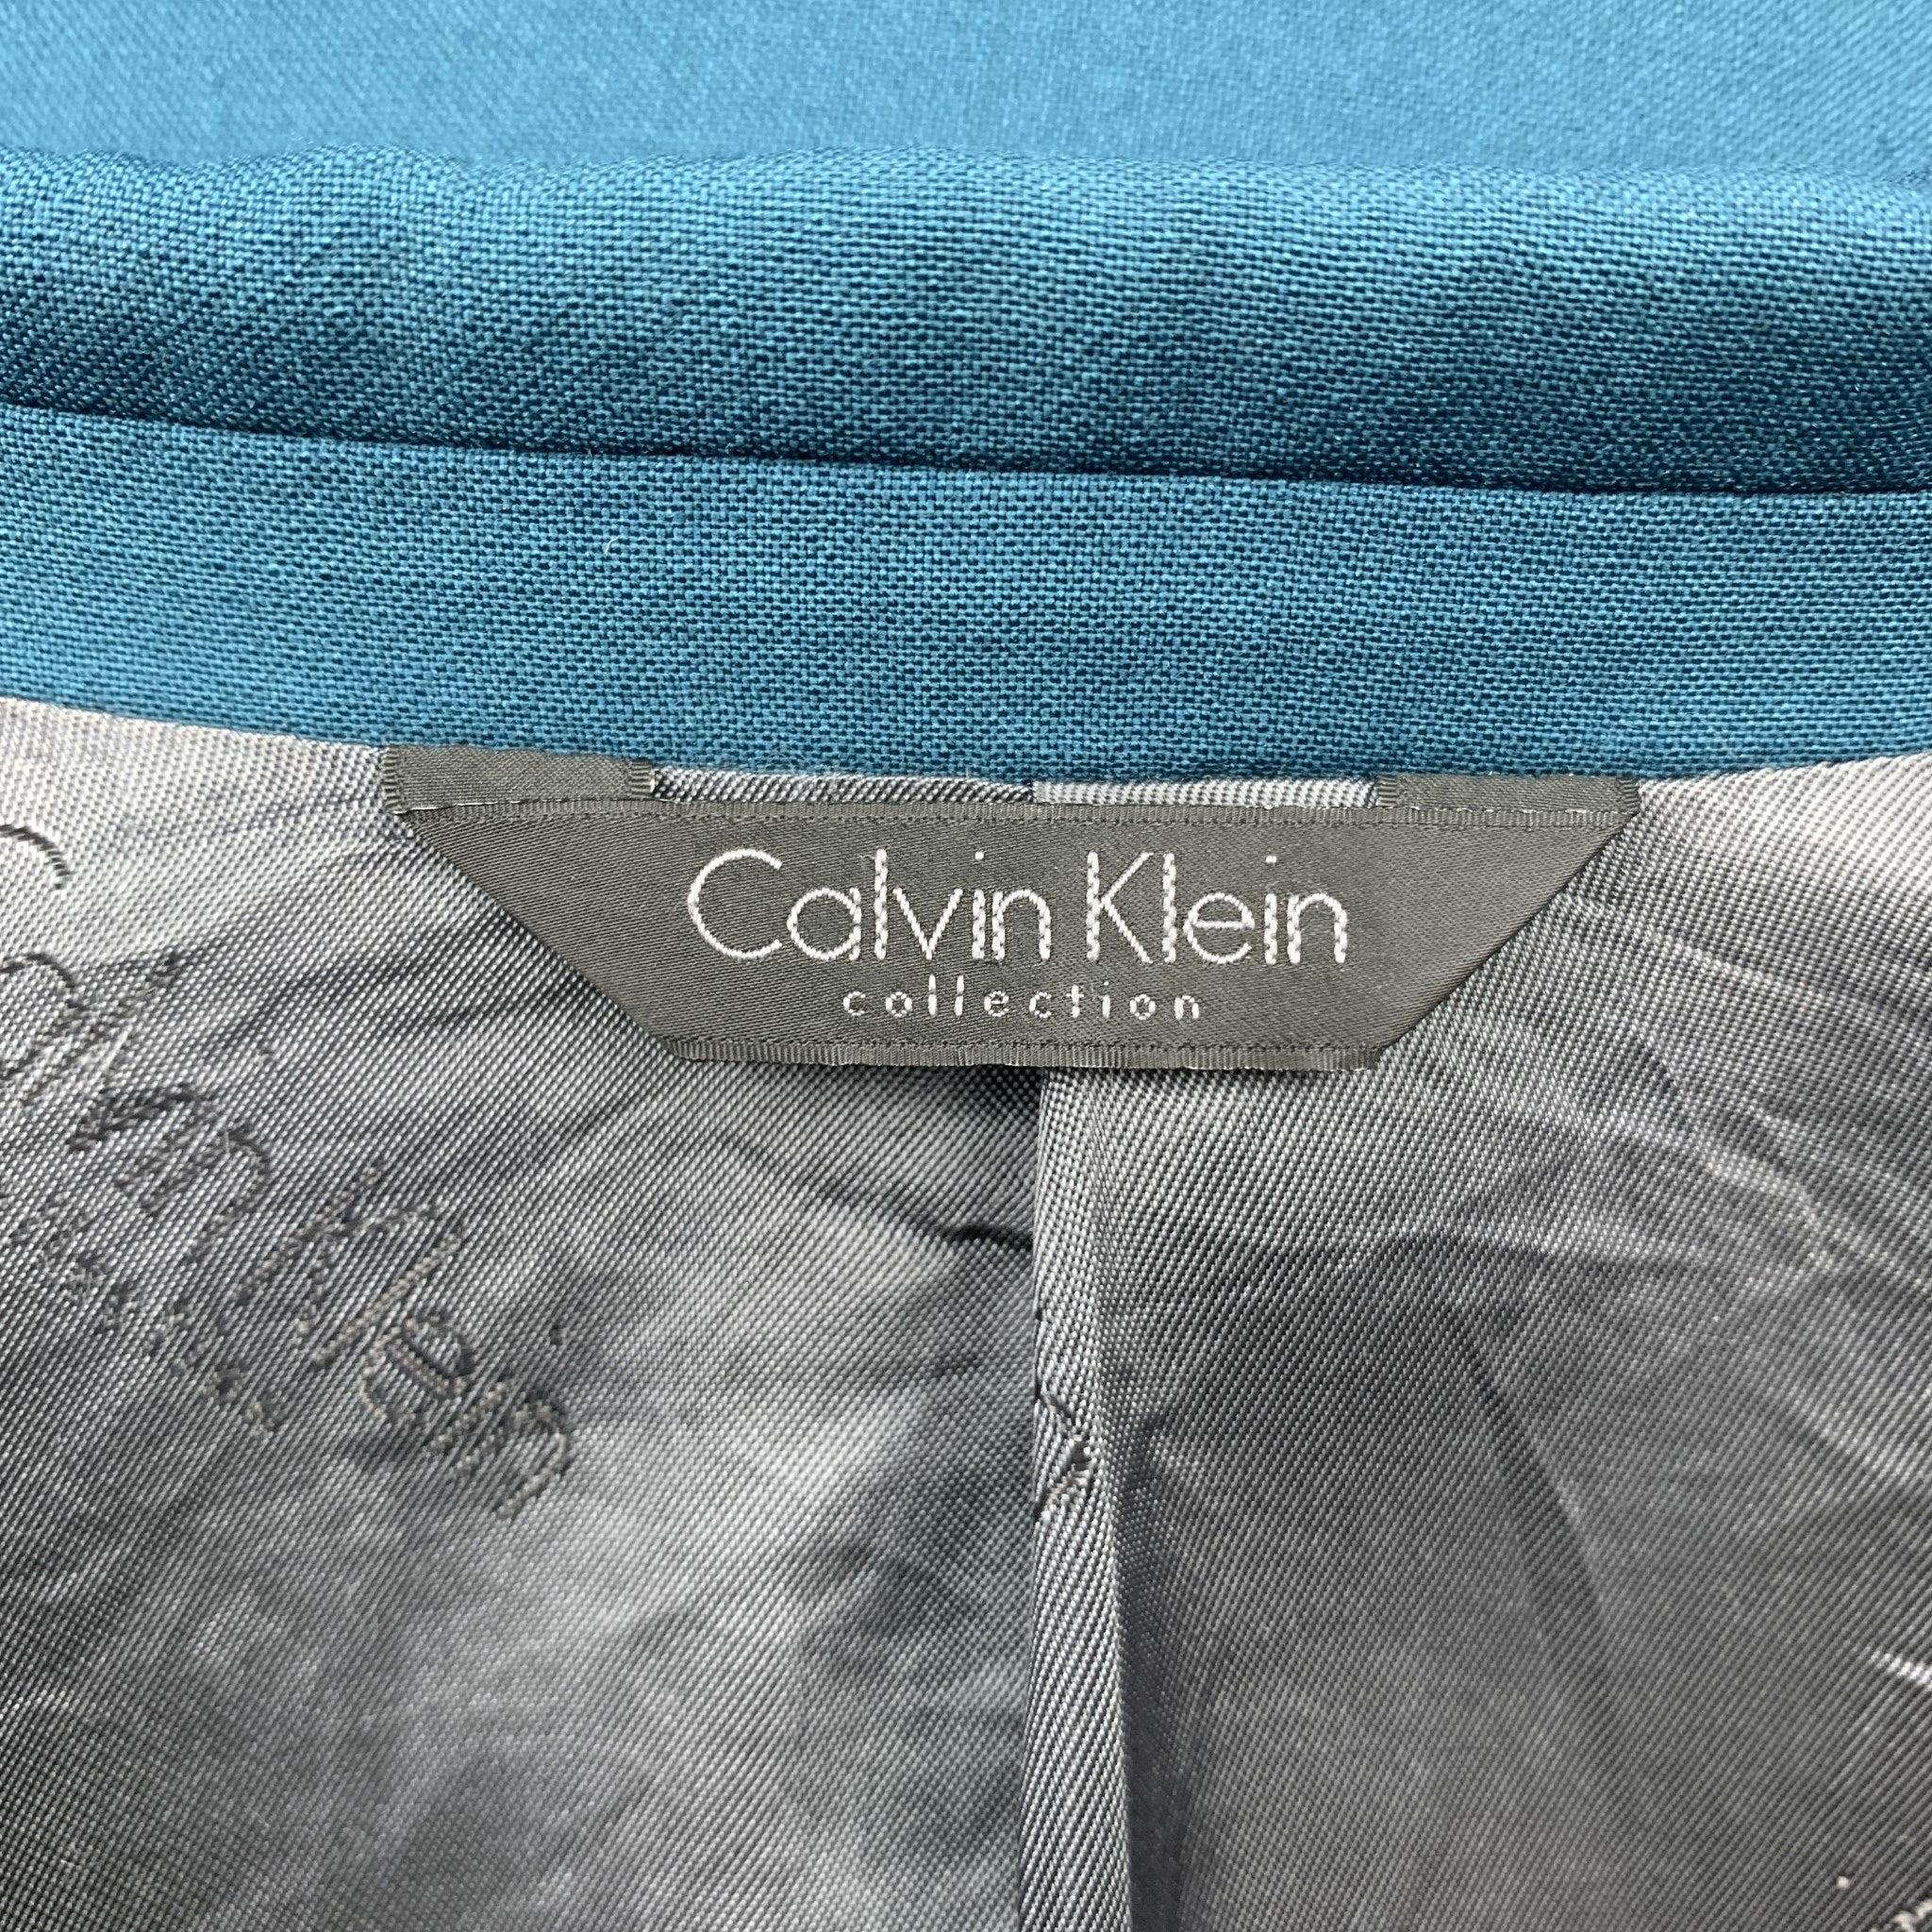 CALVIN KLEIN COLLECTION Size 36 Wool Notch Lapel Teal Suit For Sale 5